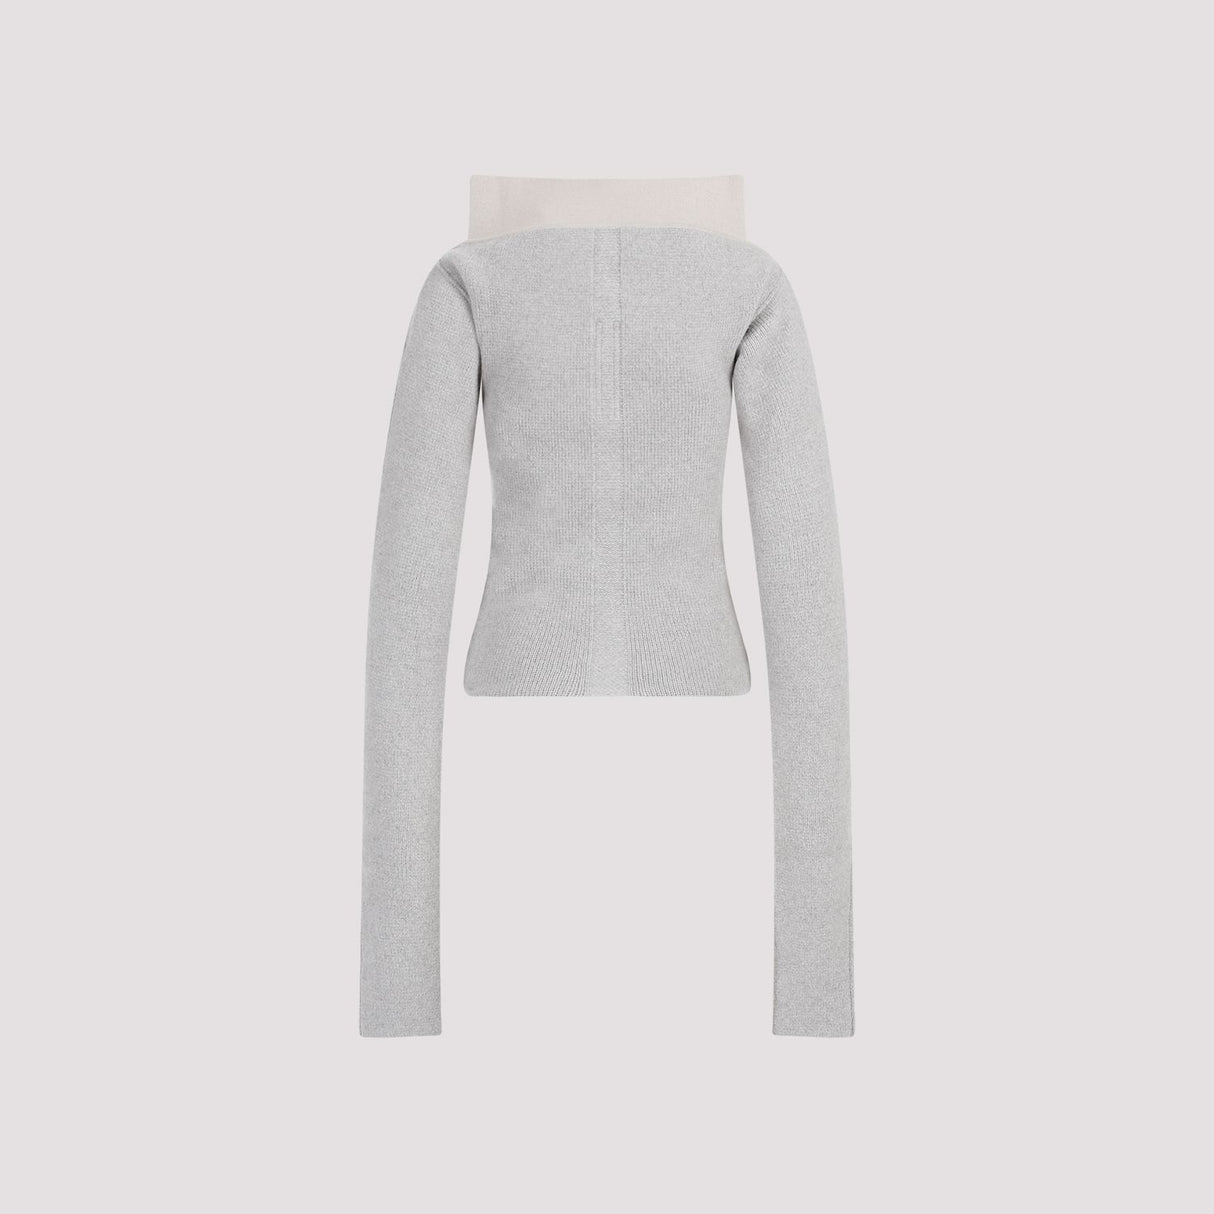 Cowl Pullover in Nude & Neutrals for Women - FW23 Cashmere Knitwear